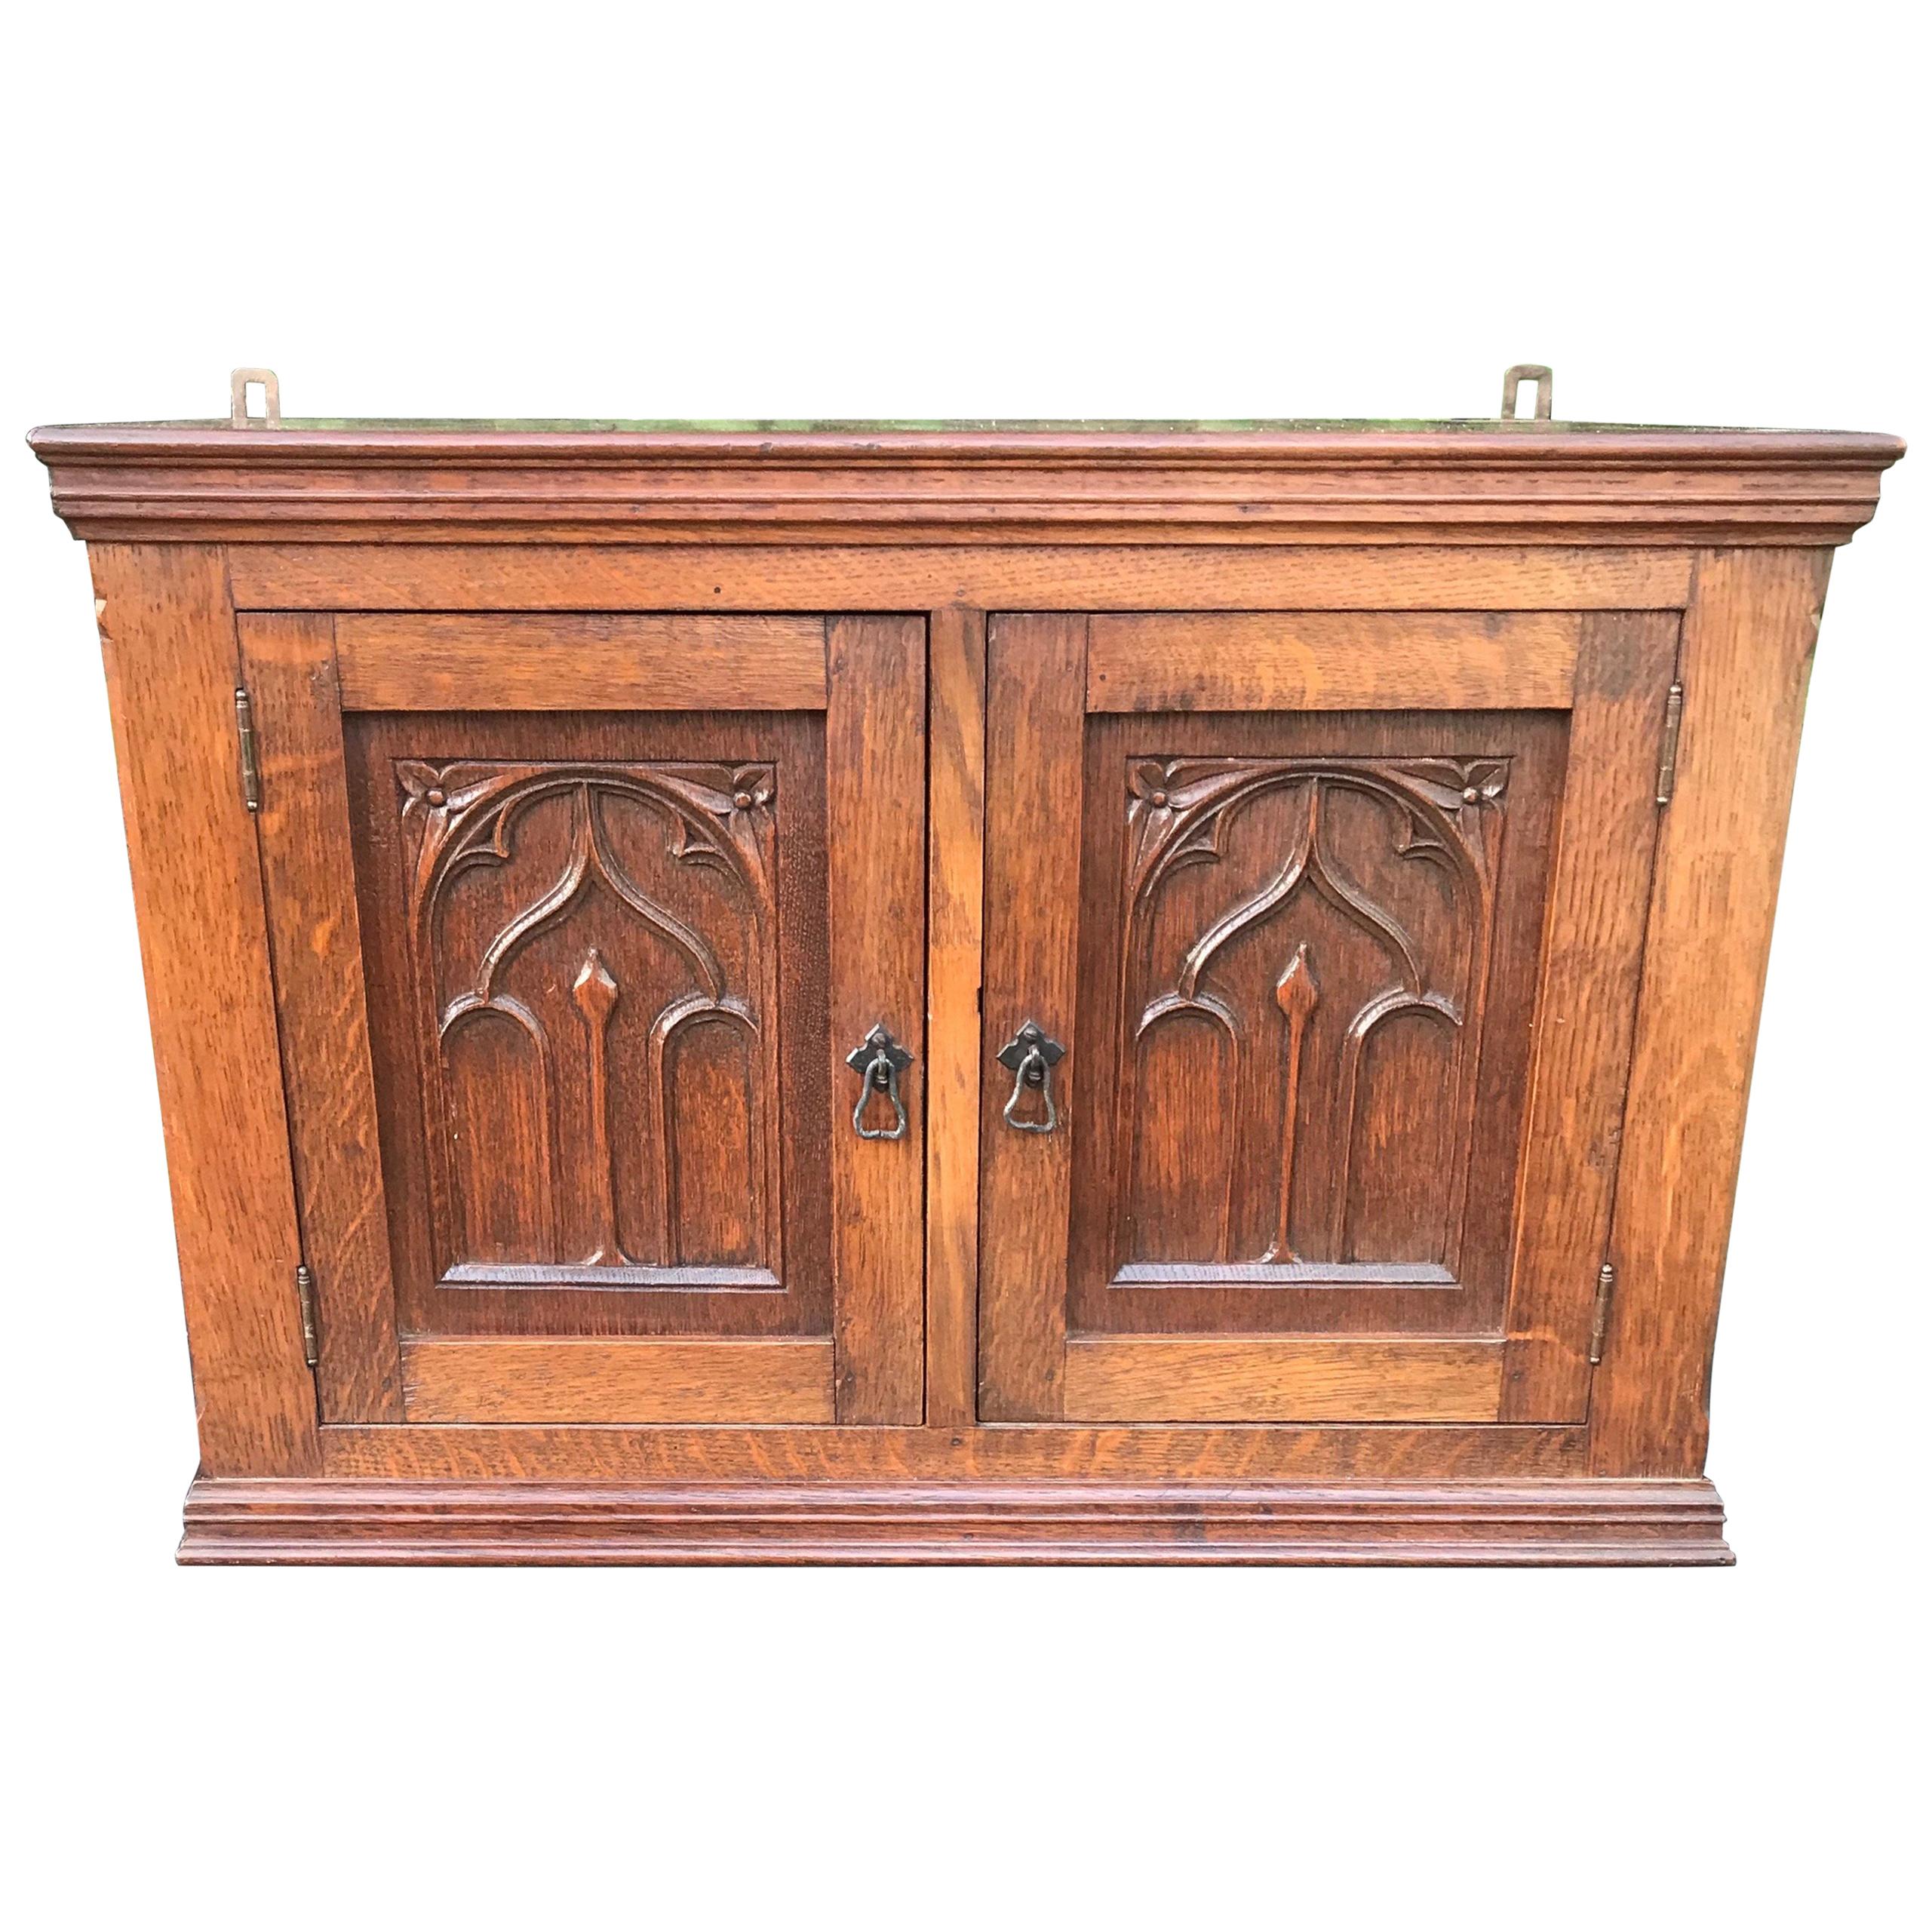 Glorious Looking Antique Handcrafted Oak Gothic Revival Hanging Wall Cabinet